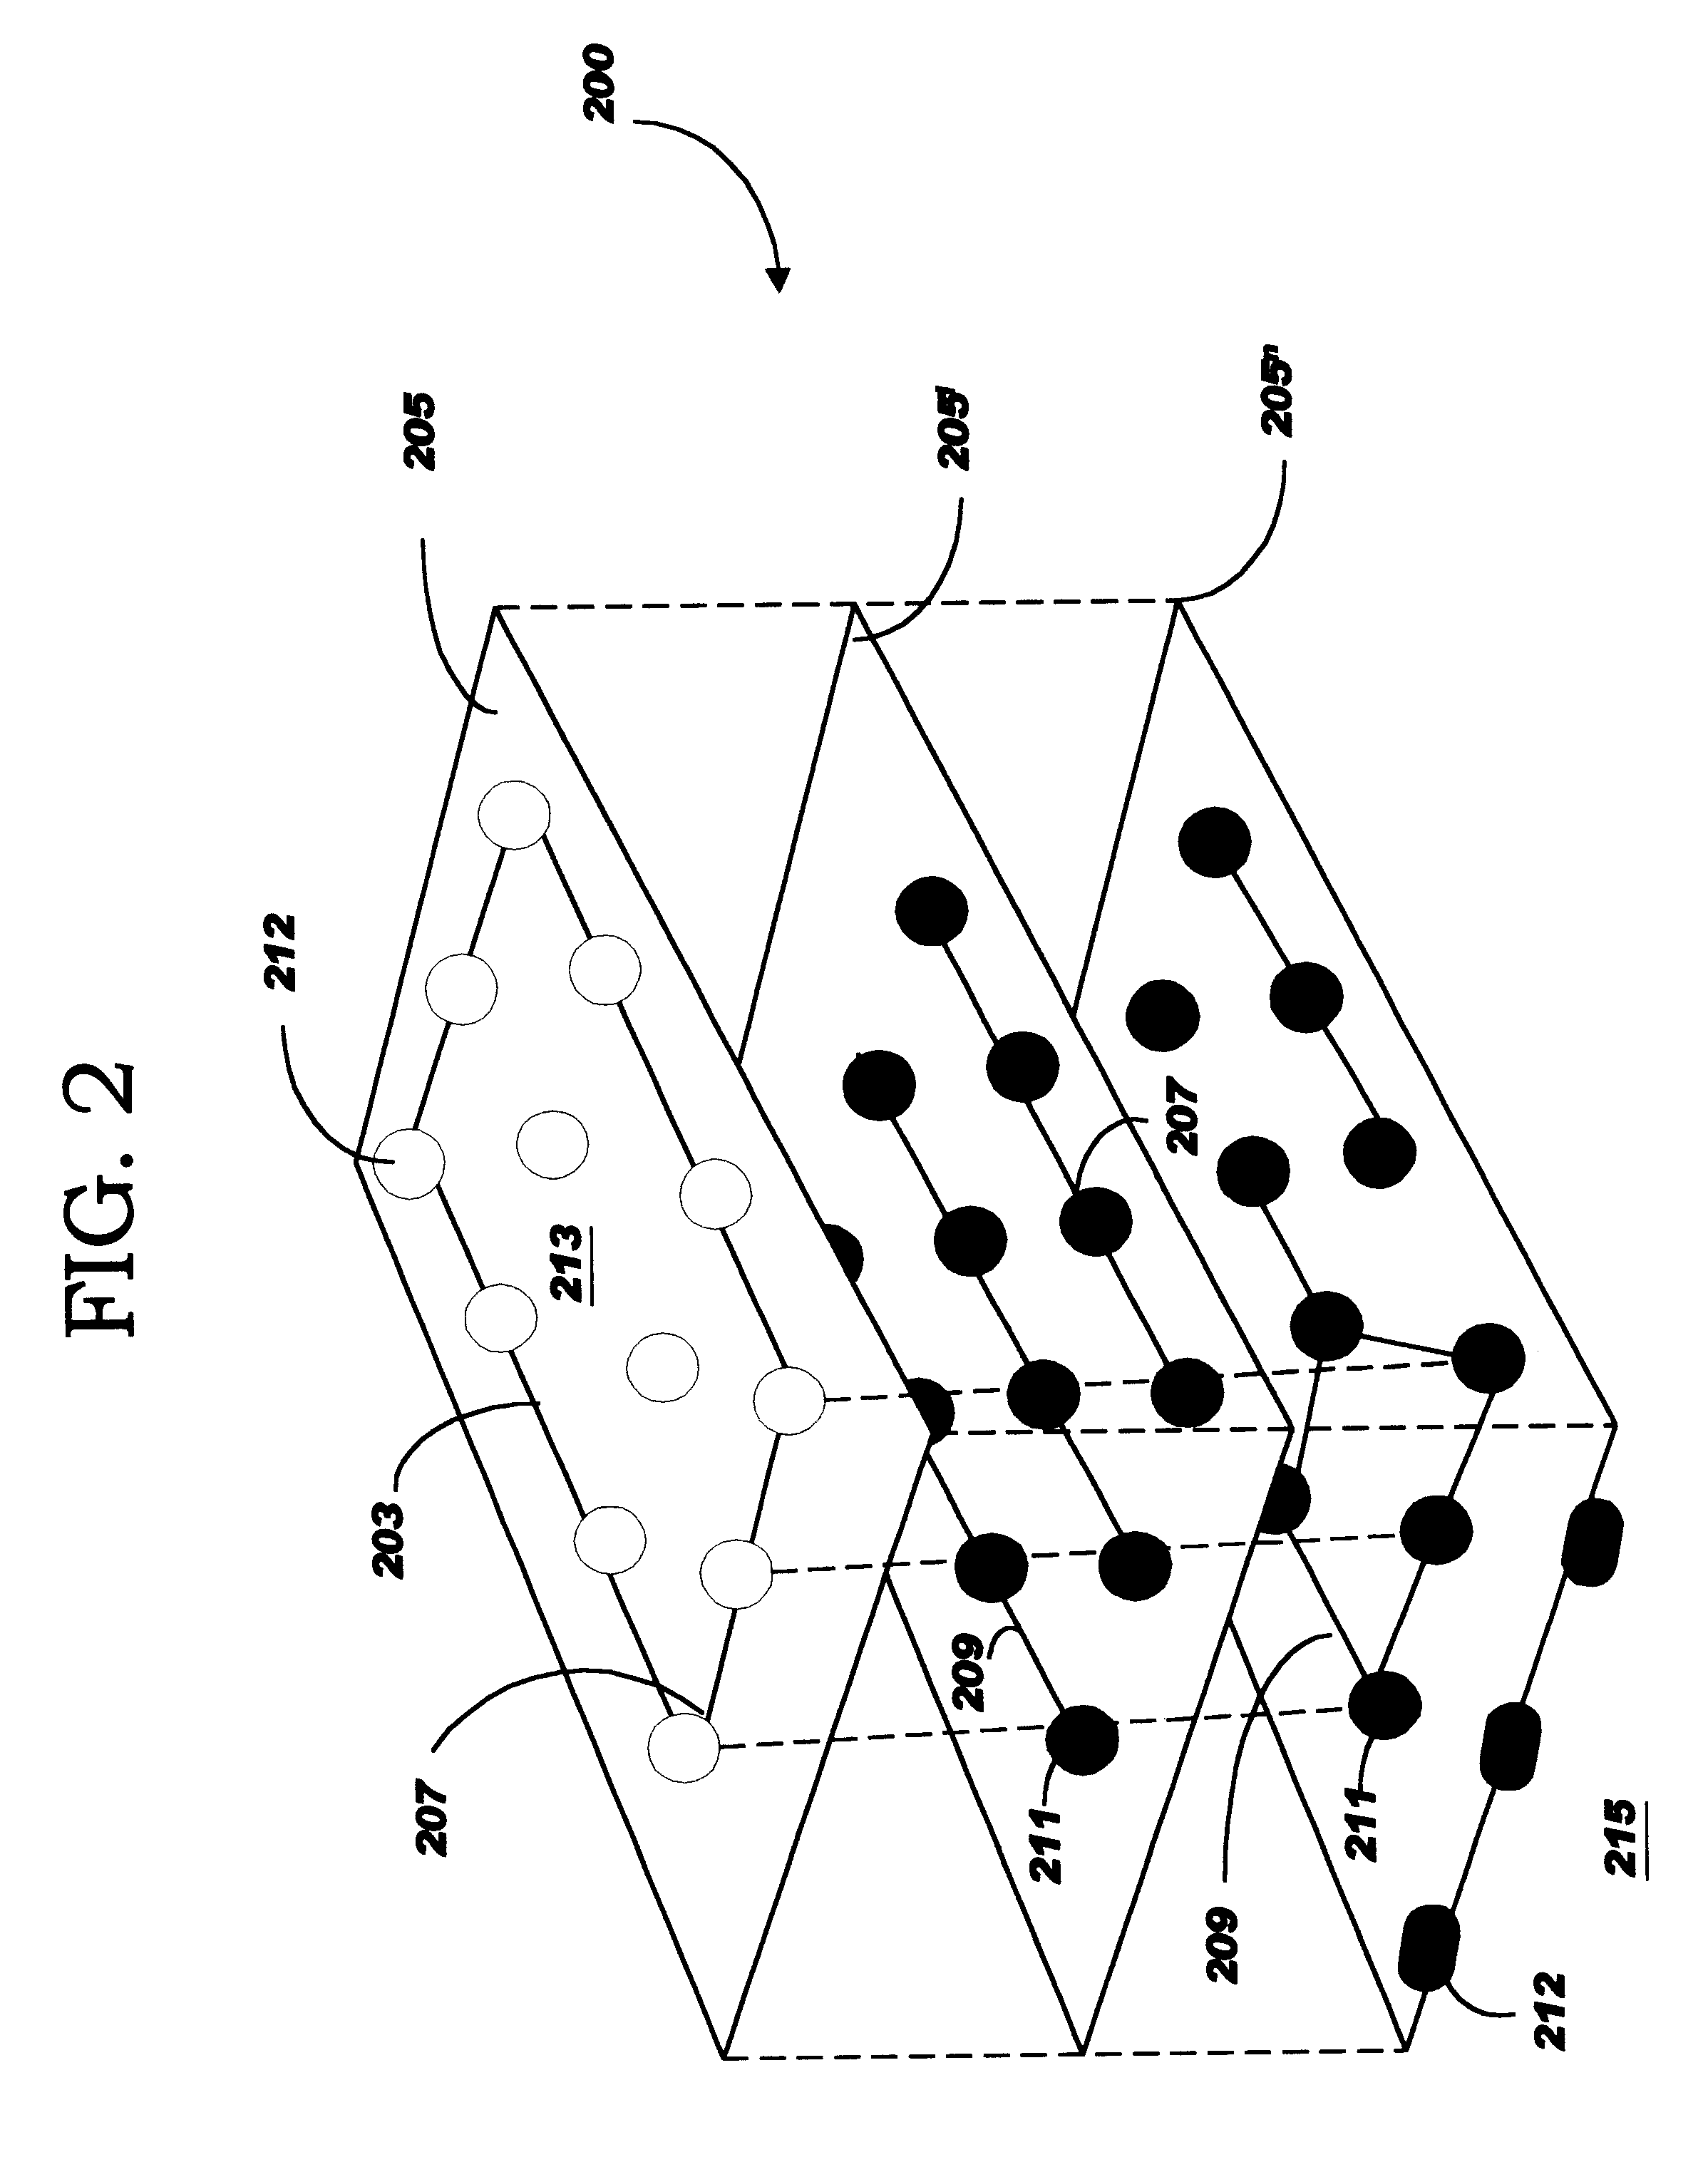 Spacer - connector stud for stacked surface laminated multichip modules and methods of manufacture